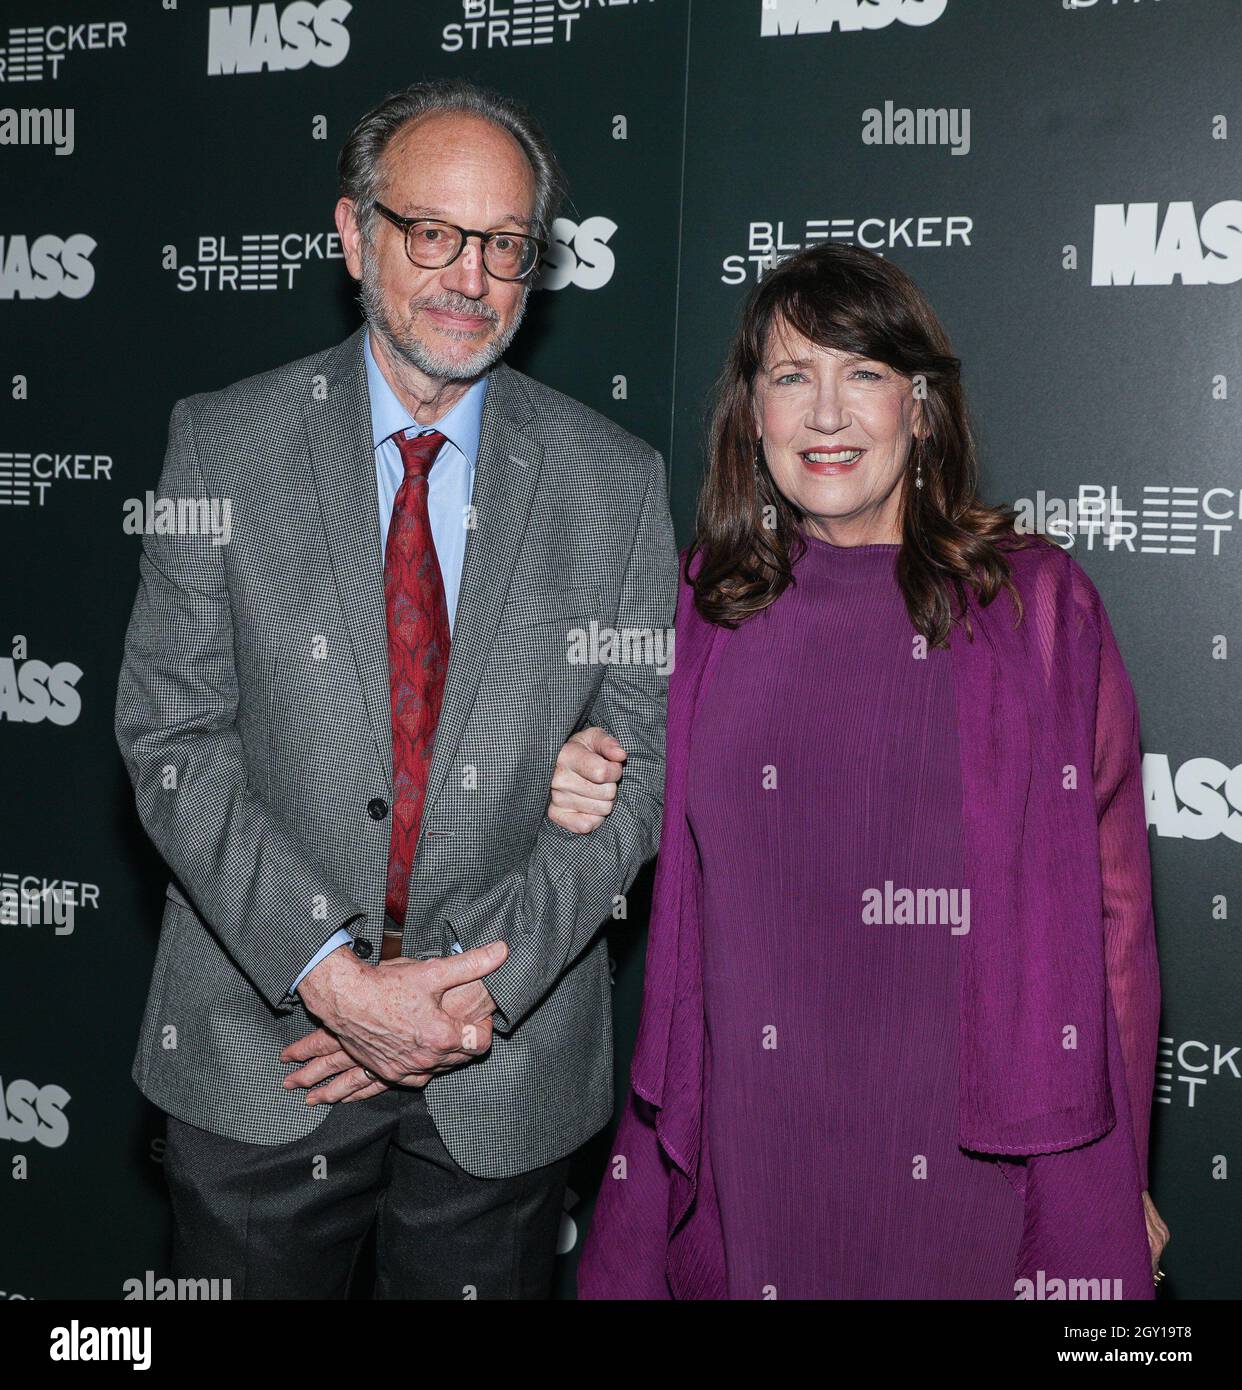 New York, NY, USA. 5th Oct, 2021. Lawrence Arancio, Ann Dowd at arrivals for MASS Special Screening, Metrograph, New York, NY October 5, 2021. Credit: CJ Rivera/Everett Collection/Alamy Live News Stock Photo